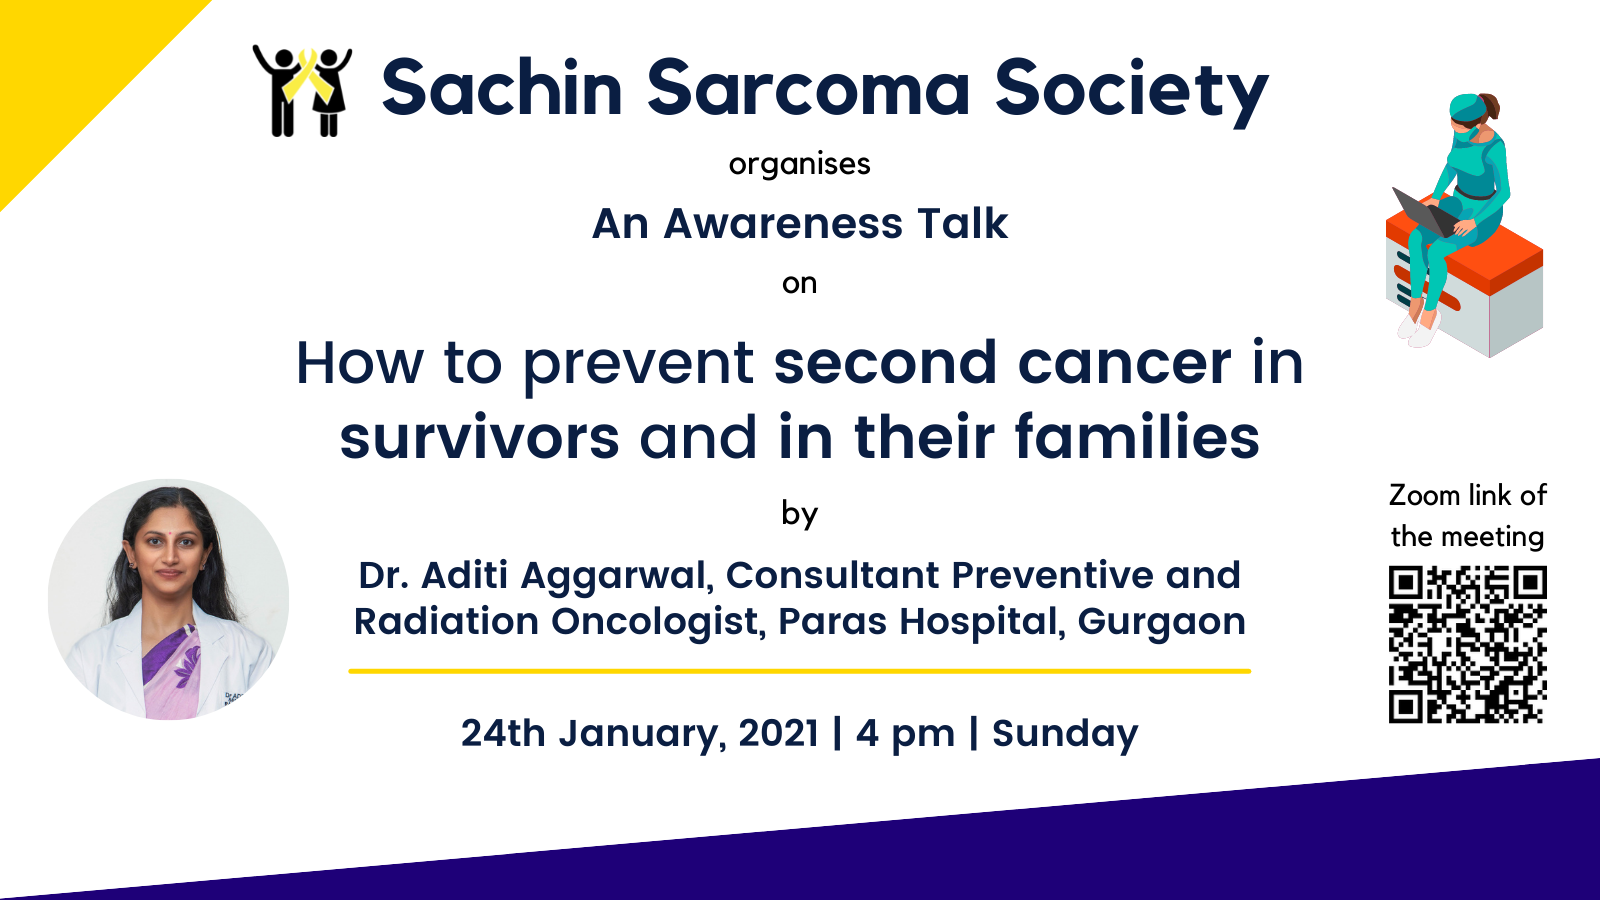 How to prevent second cancer in survivors and in their families